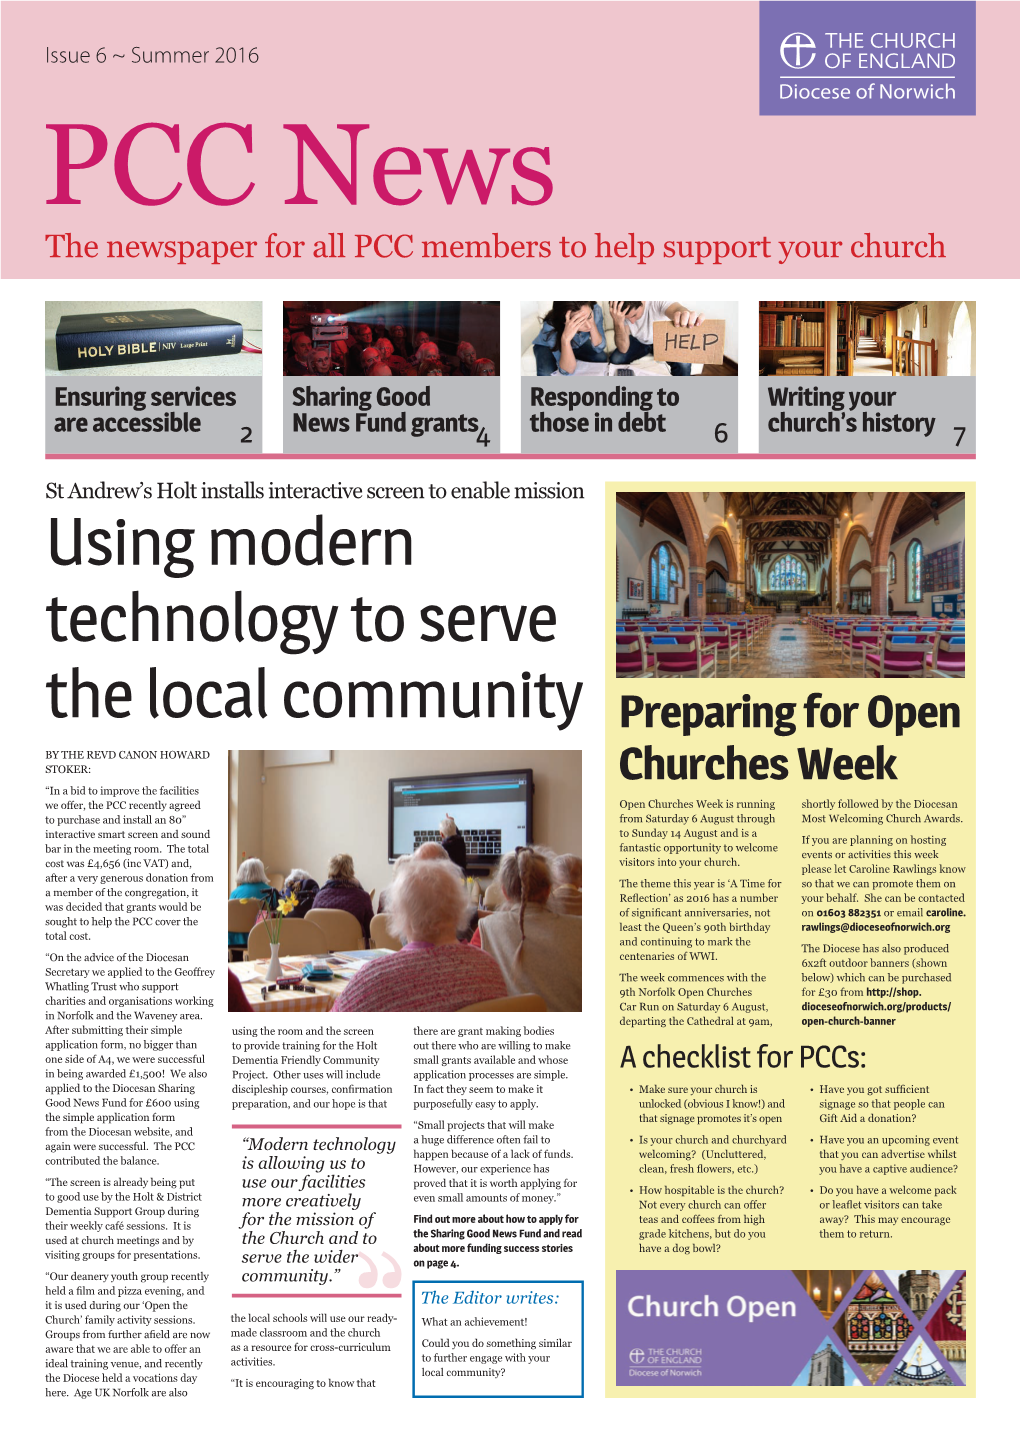 PCC News the Newspaper for All PCC Members to Help Support Your Church